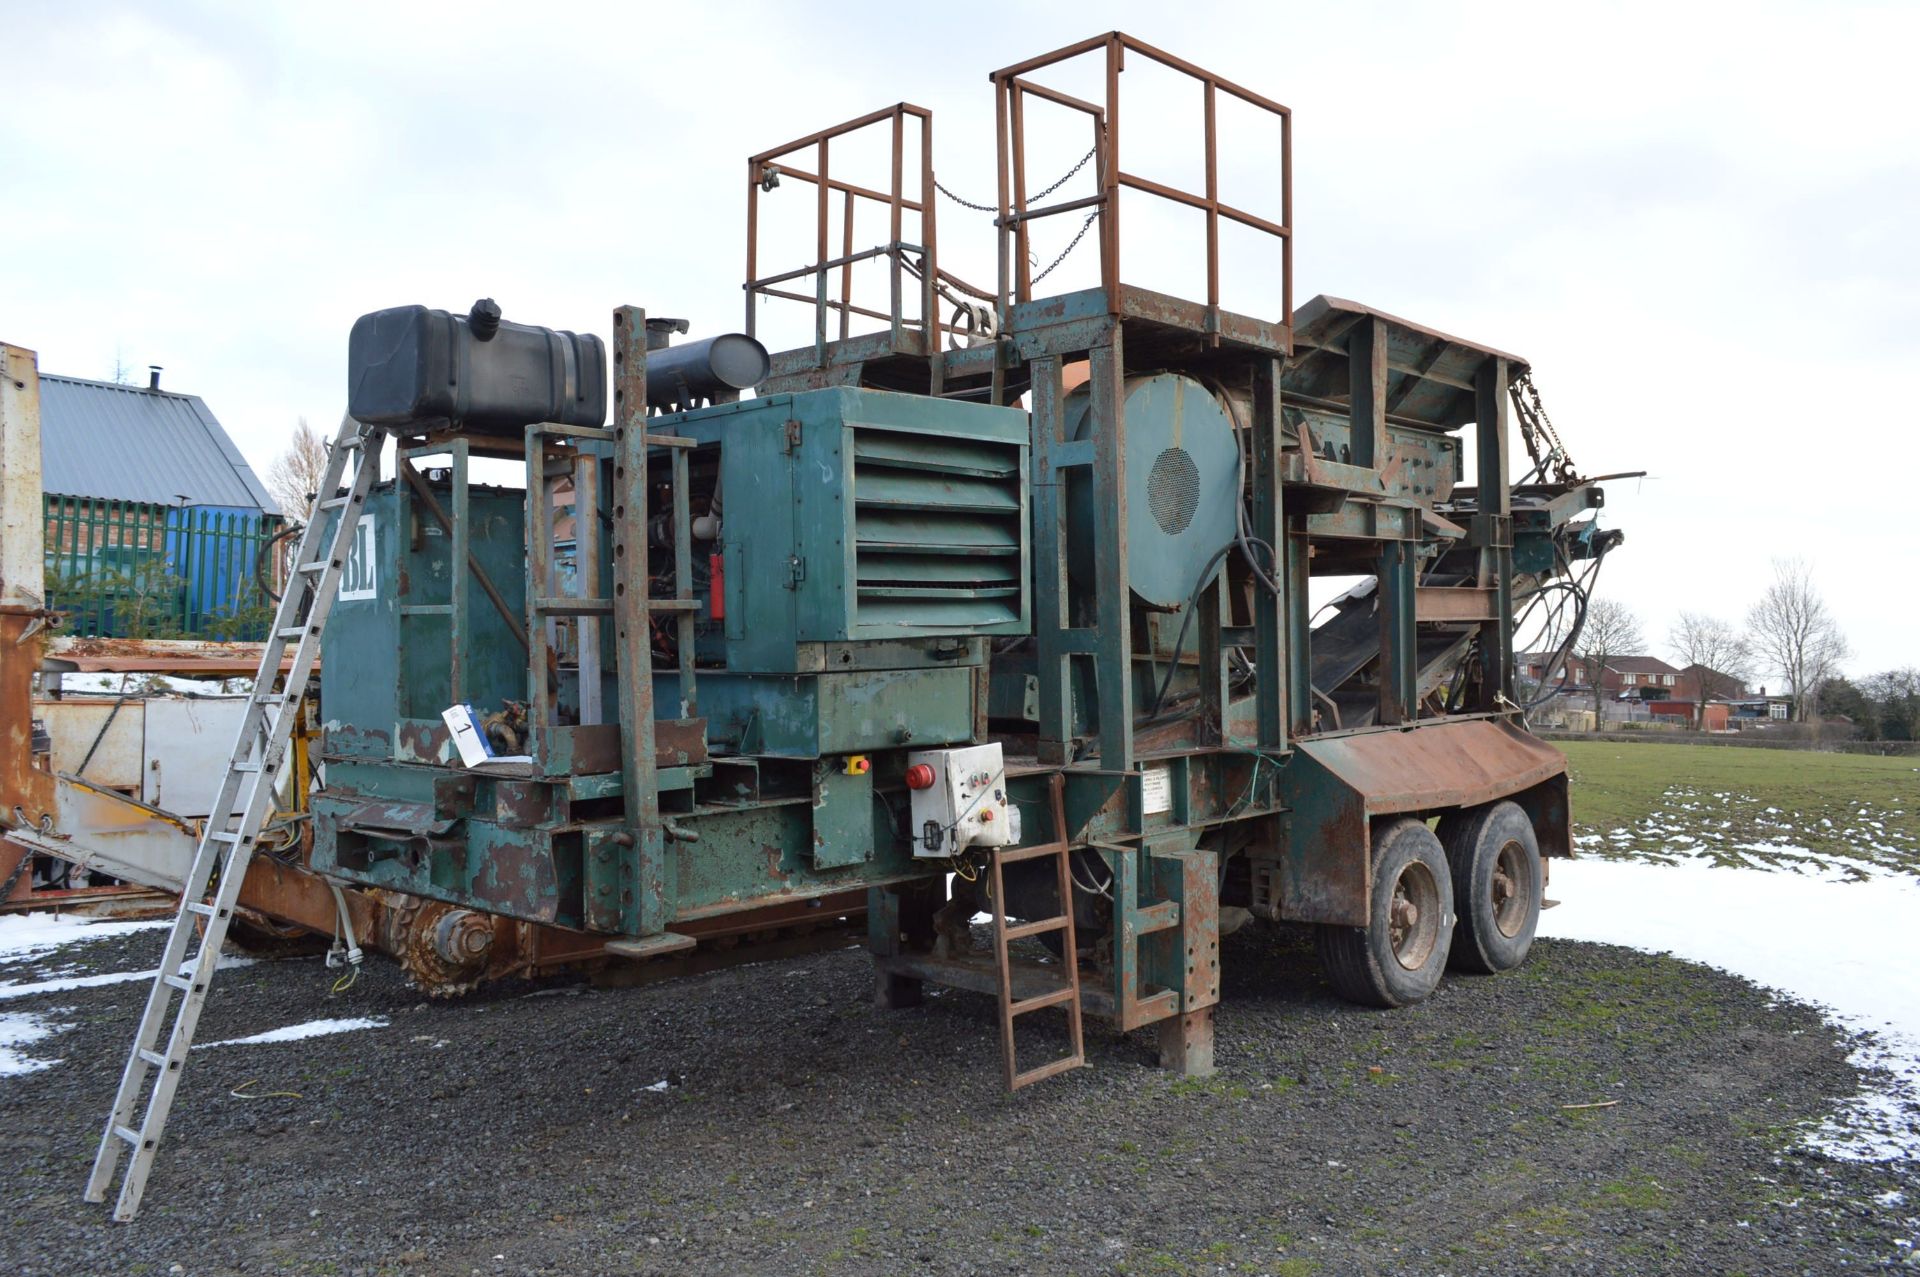 Brown Lennox TANDEM AXLE MOUNTED CRUSHER, serial no. SL9301856VP009094, with Kue-Ken 30x18